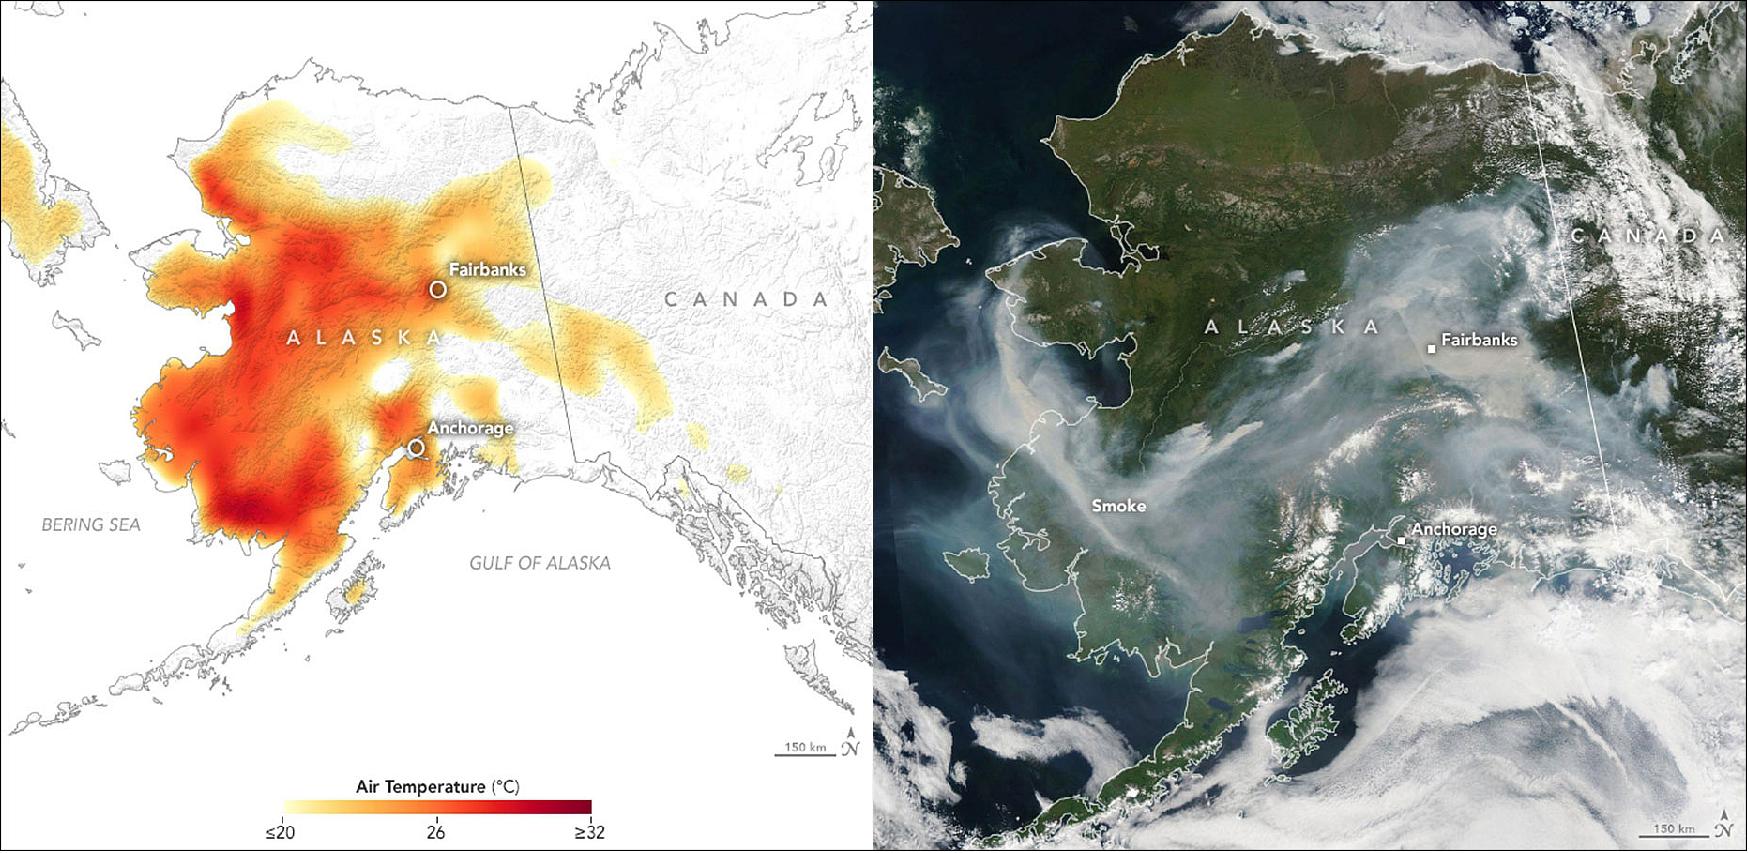 Figure 18: In June and early July 2019, a heat wave in Alaska broke temperature records, as seen in this July 8 air temperature map (left). The corresponding image from the Moderate Resolution Imaging Spectroradiometer (MODIS) instrument on the Aqua satellite on the right shows smoke from lightening-triggered wildfires (image credit: NASA Earth Observatory)